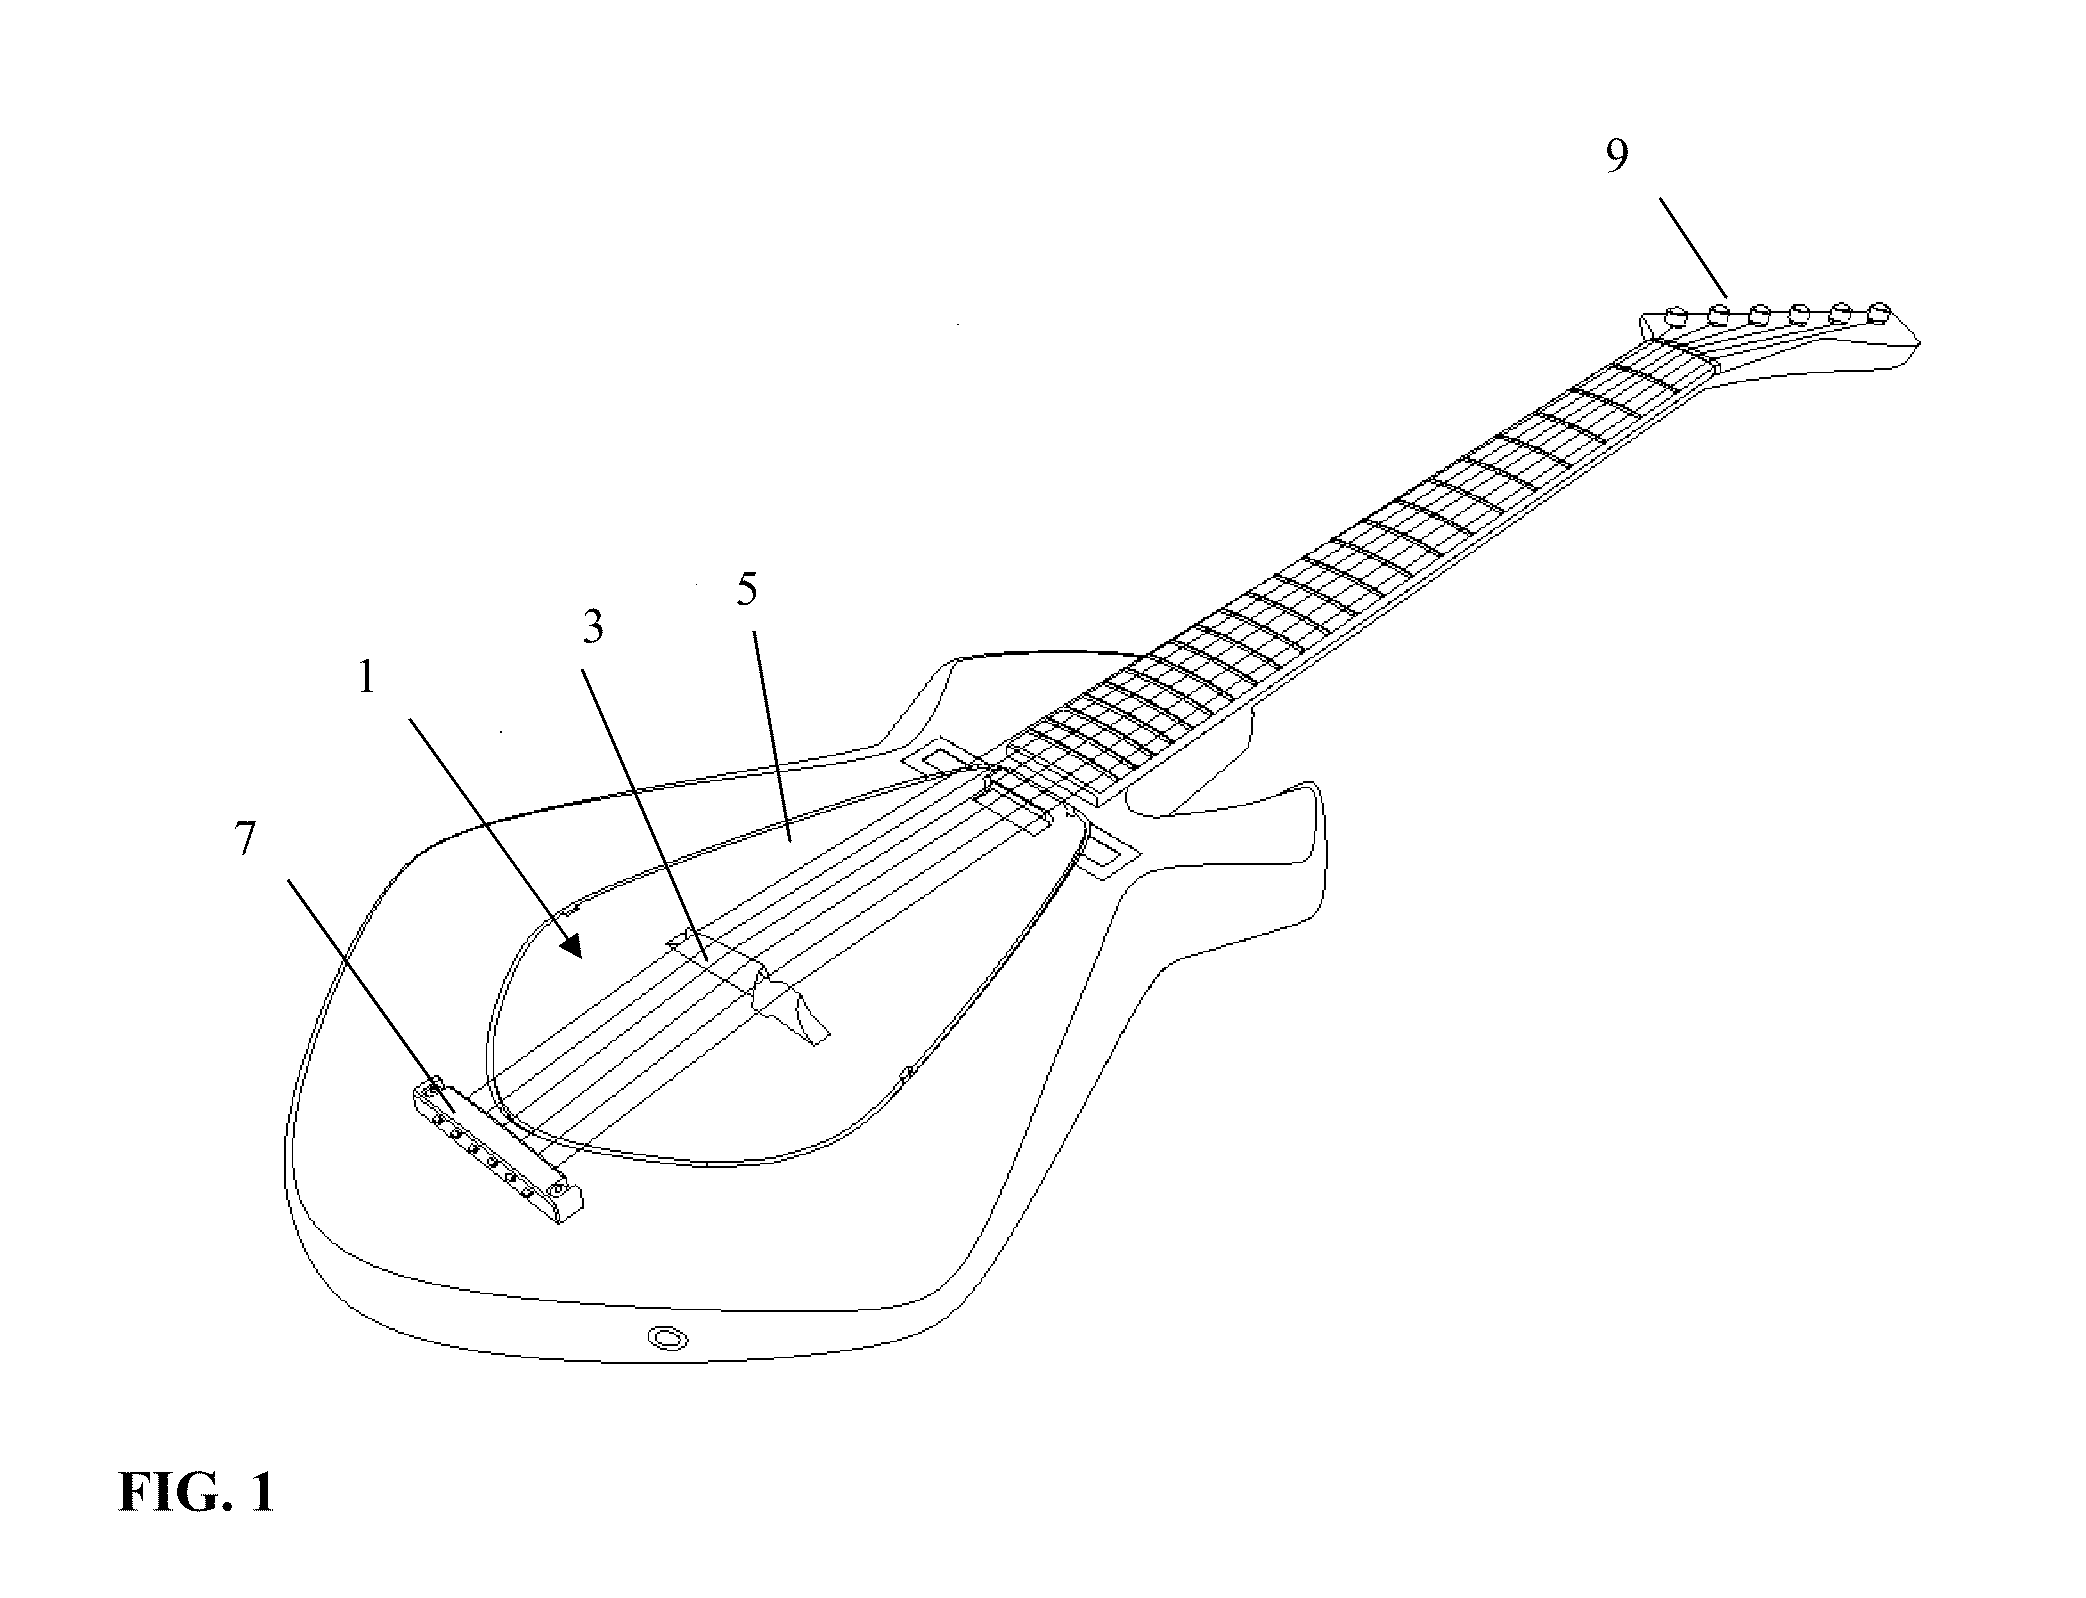 Digital Instrument with Physical Resonator